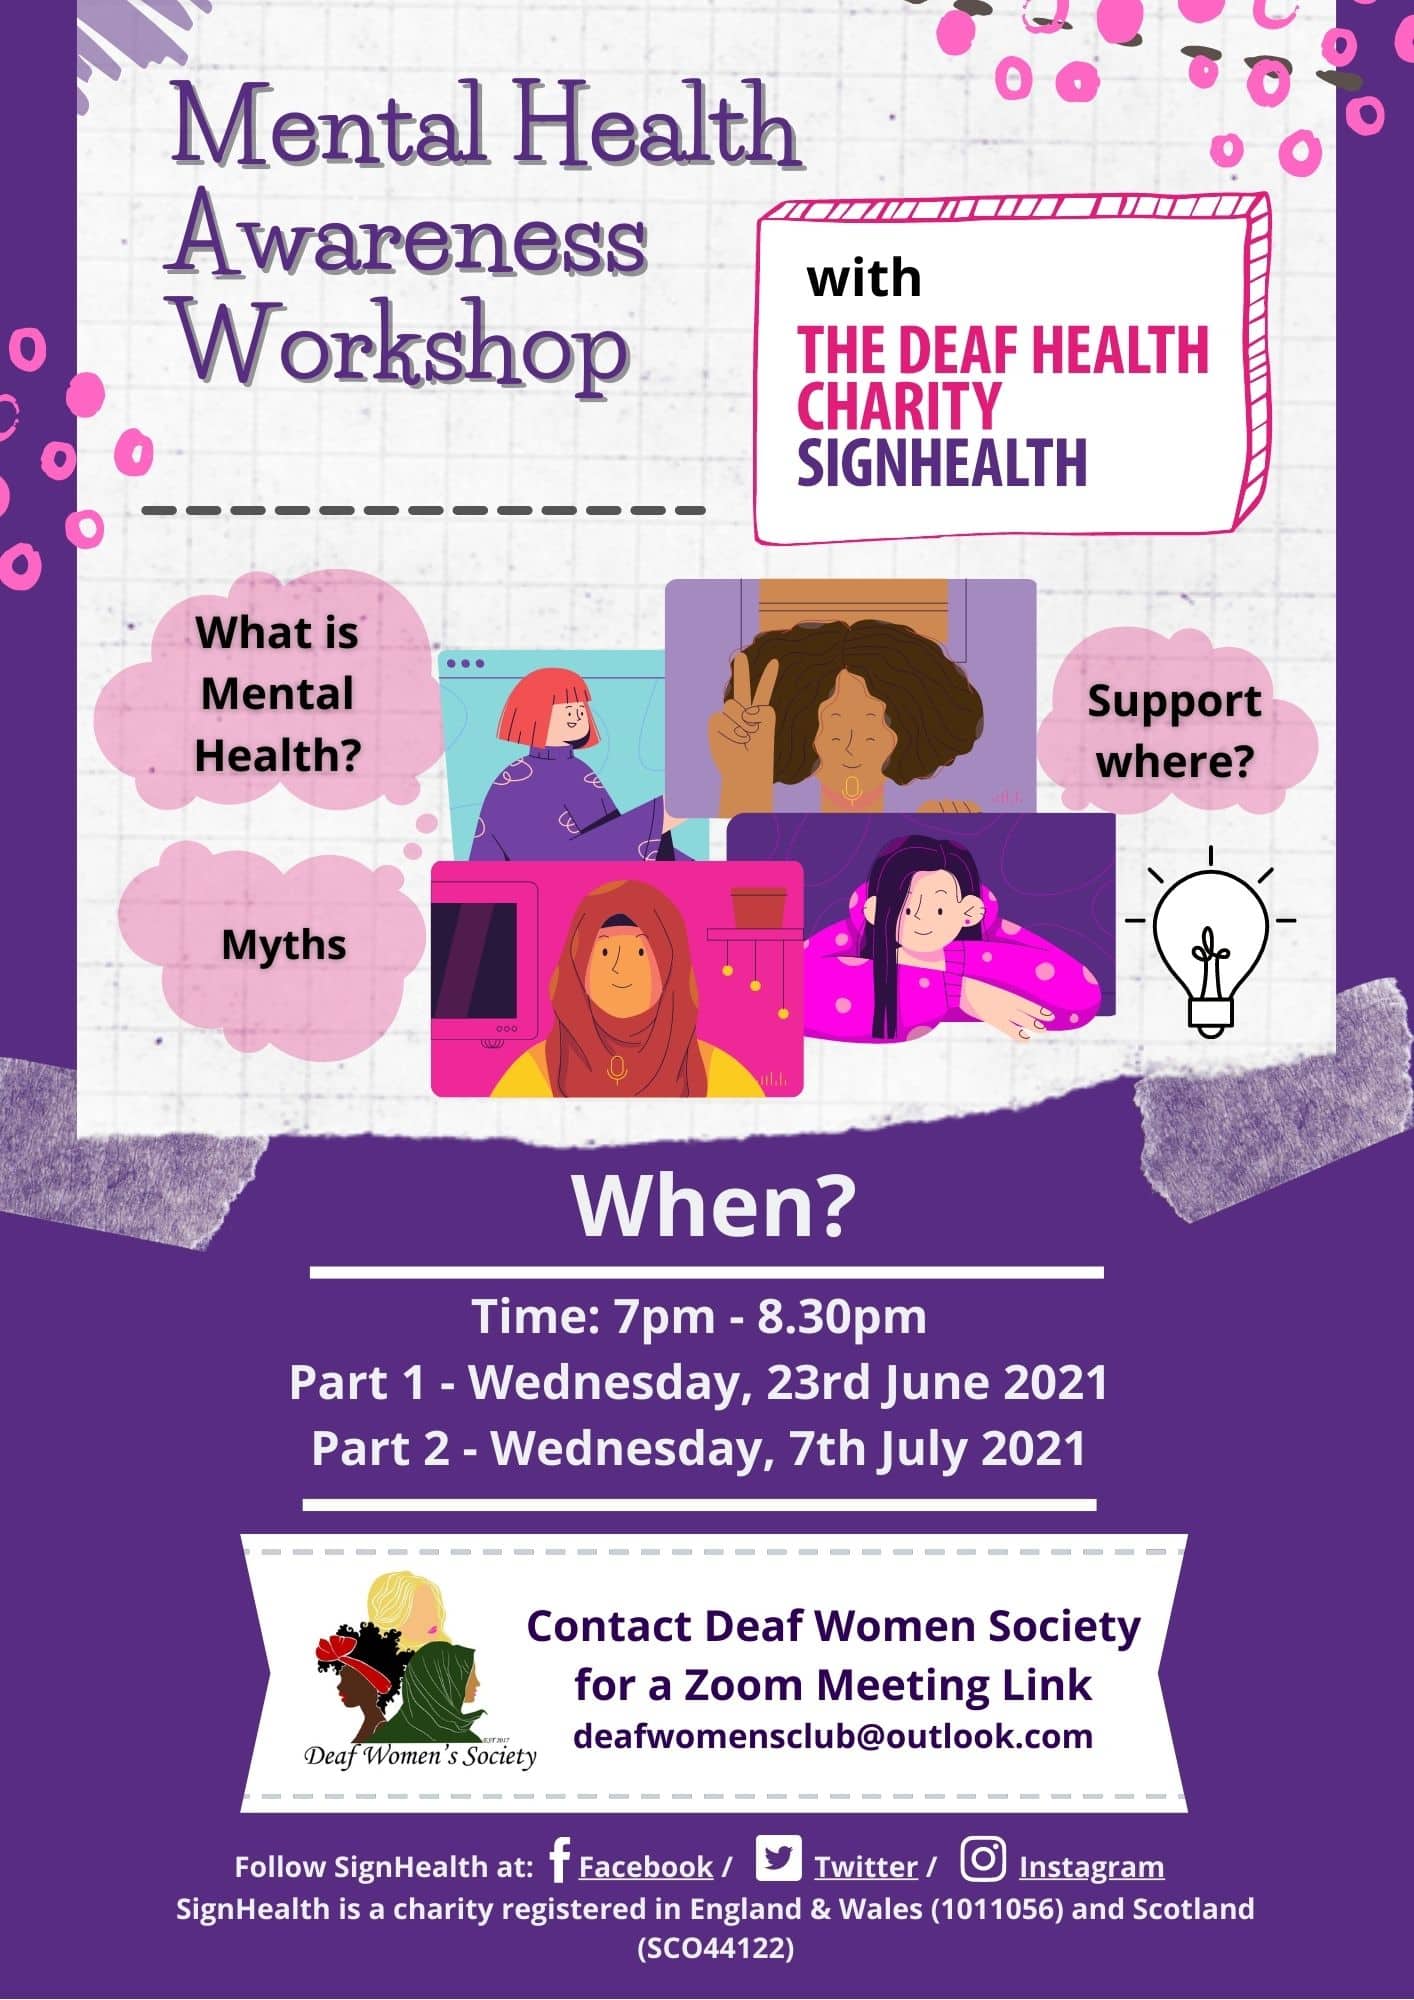 Mental Health Awareness Workshop with the Deaf Women's Society - SignHealth